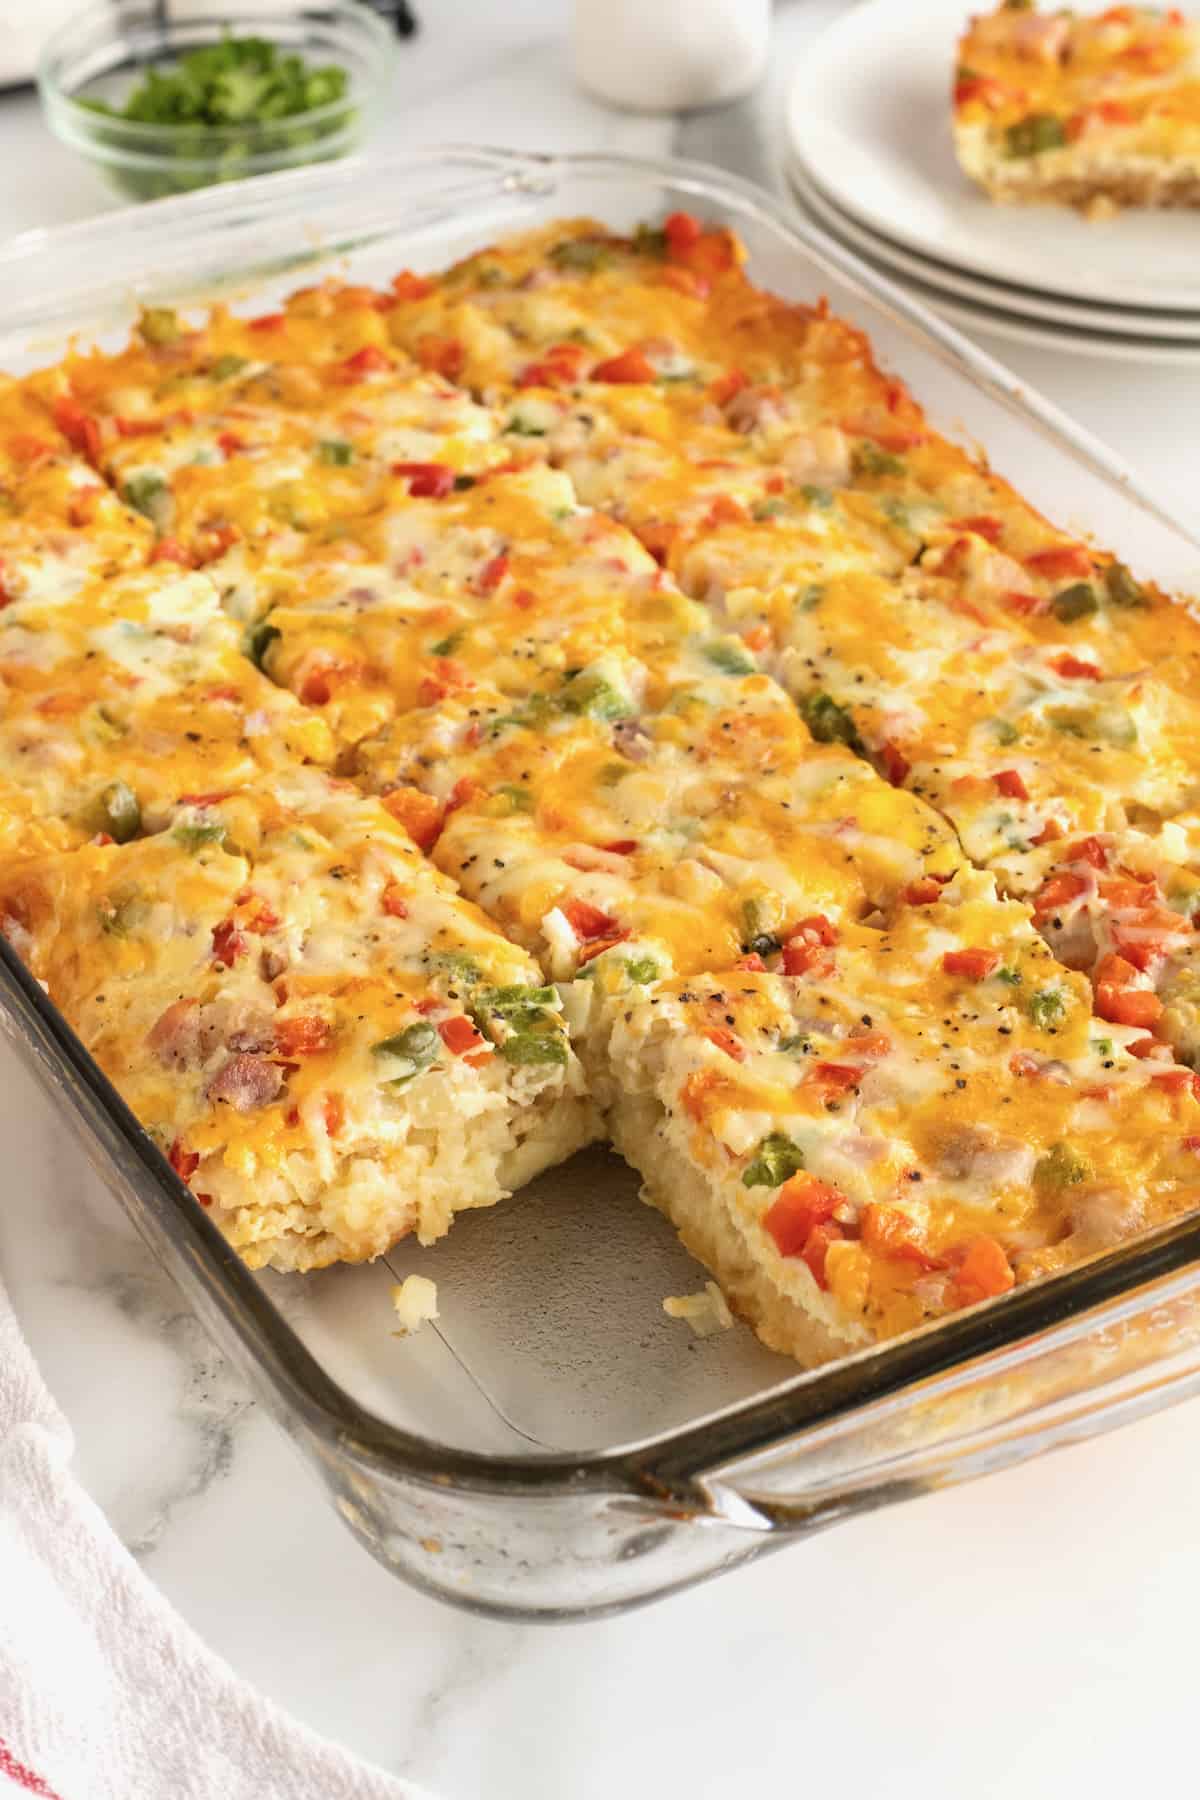 A clear glass baking dish with hash brown breakfast casserole.